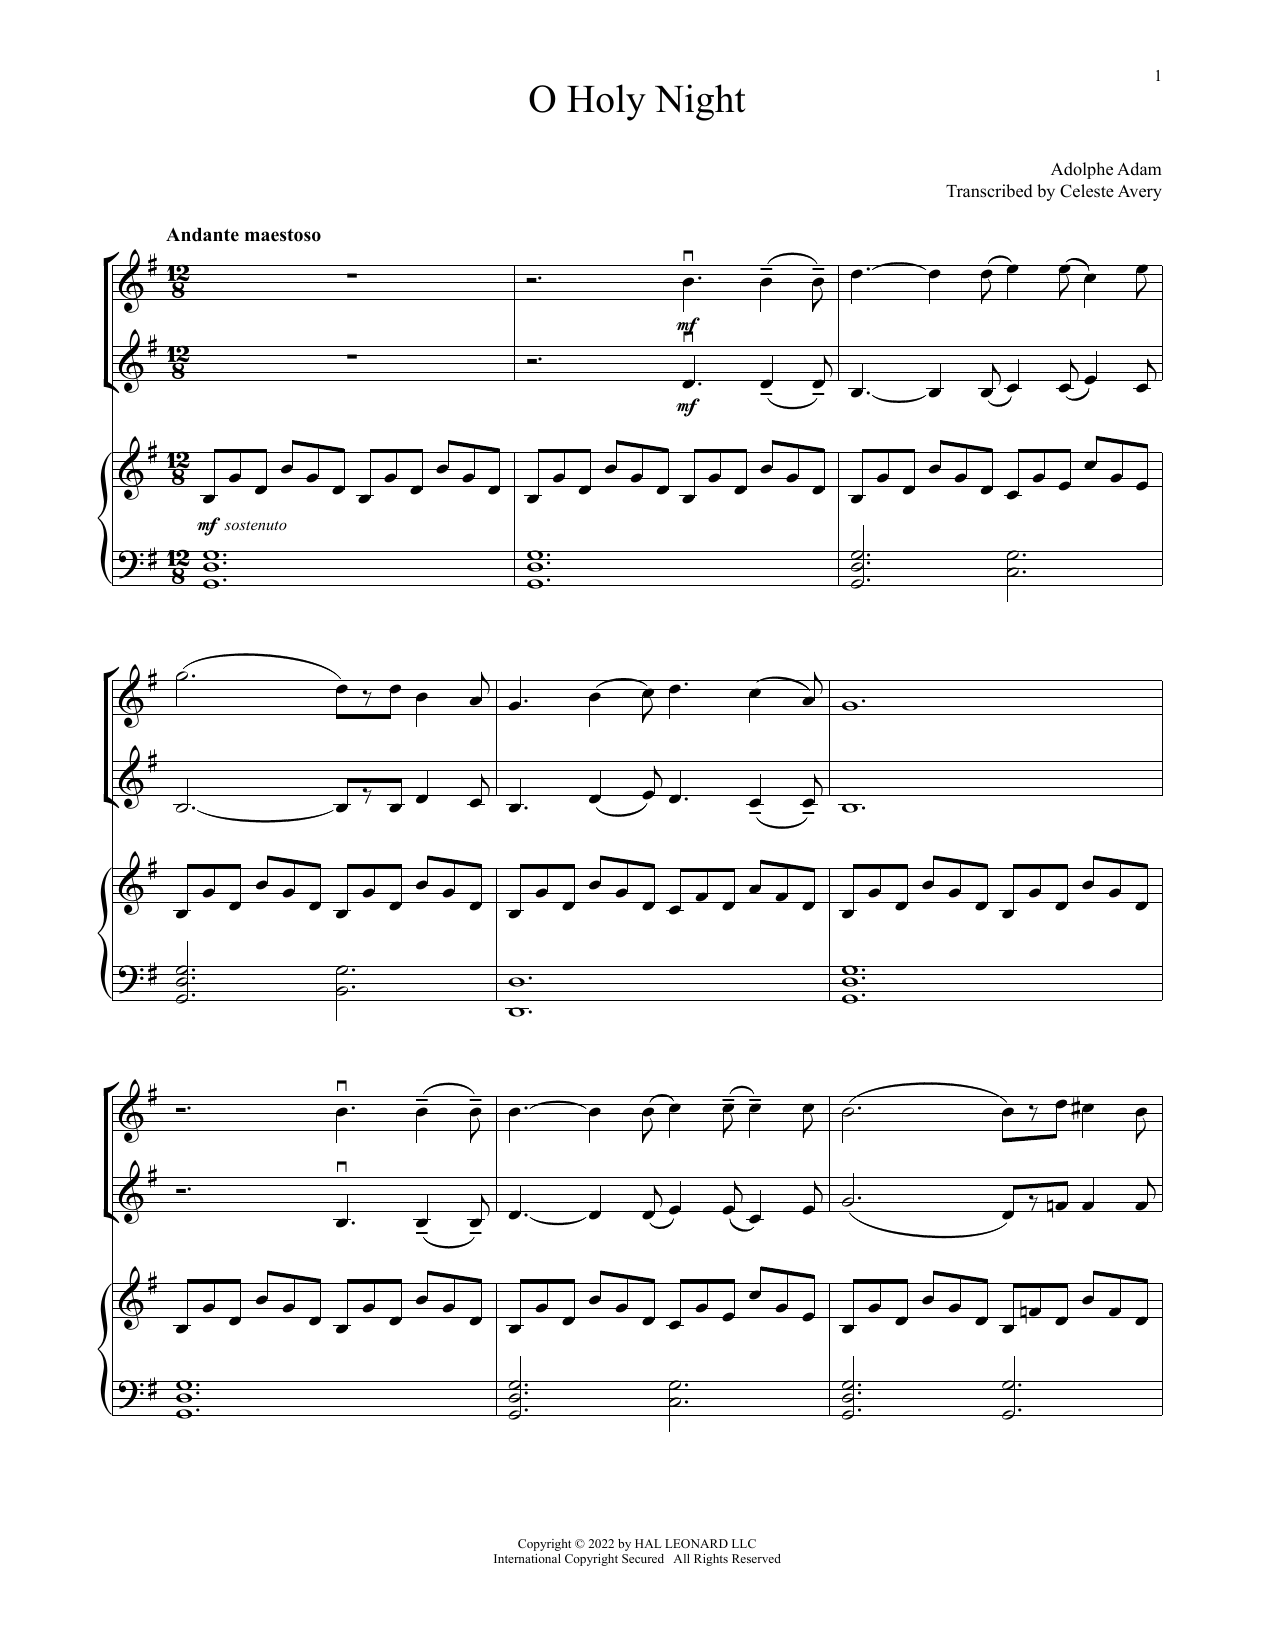 Adolphe Adam O Holy Night (for Violin Duet and Piano) sheet music notes and chords. Download Printable PDF.